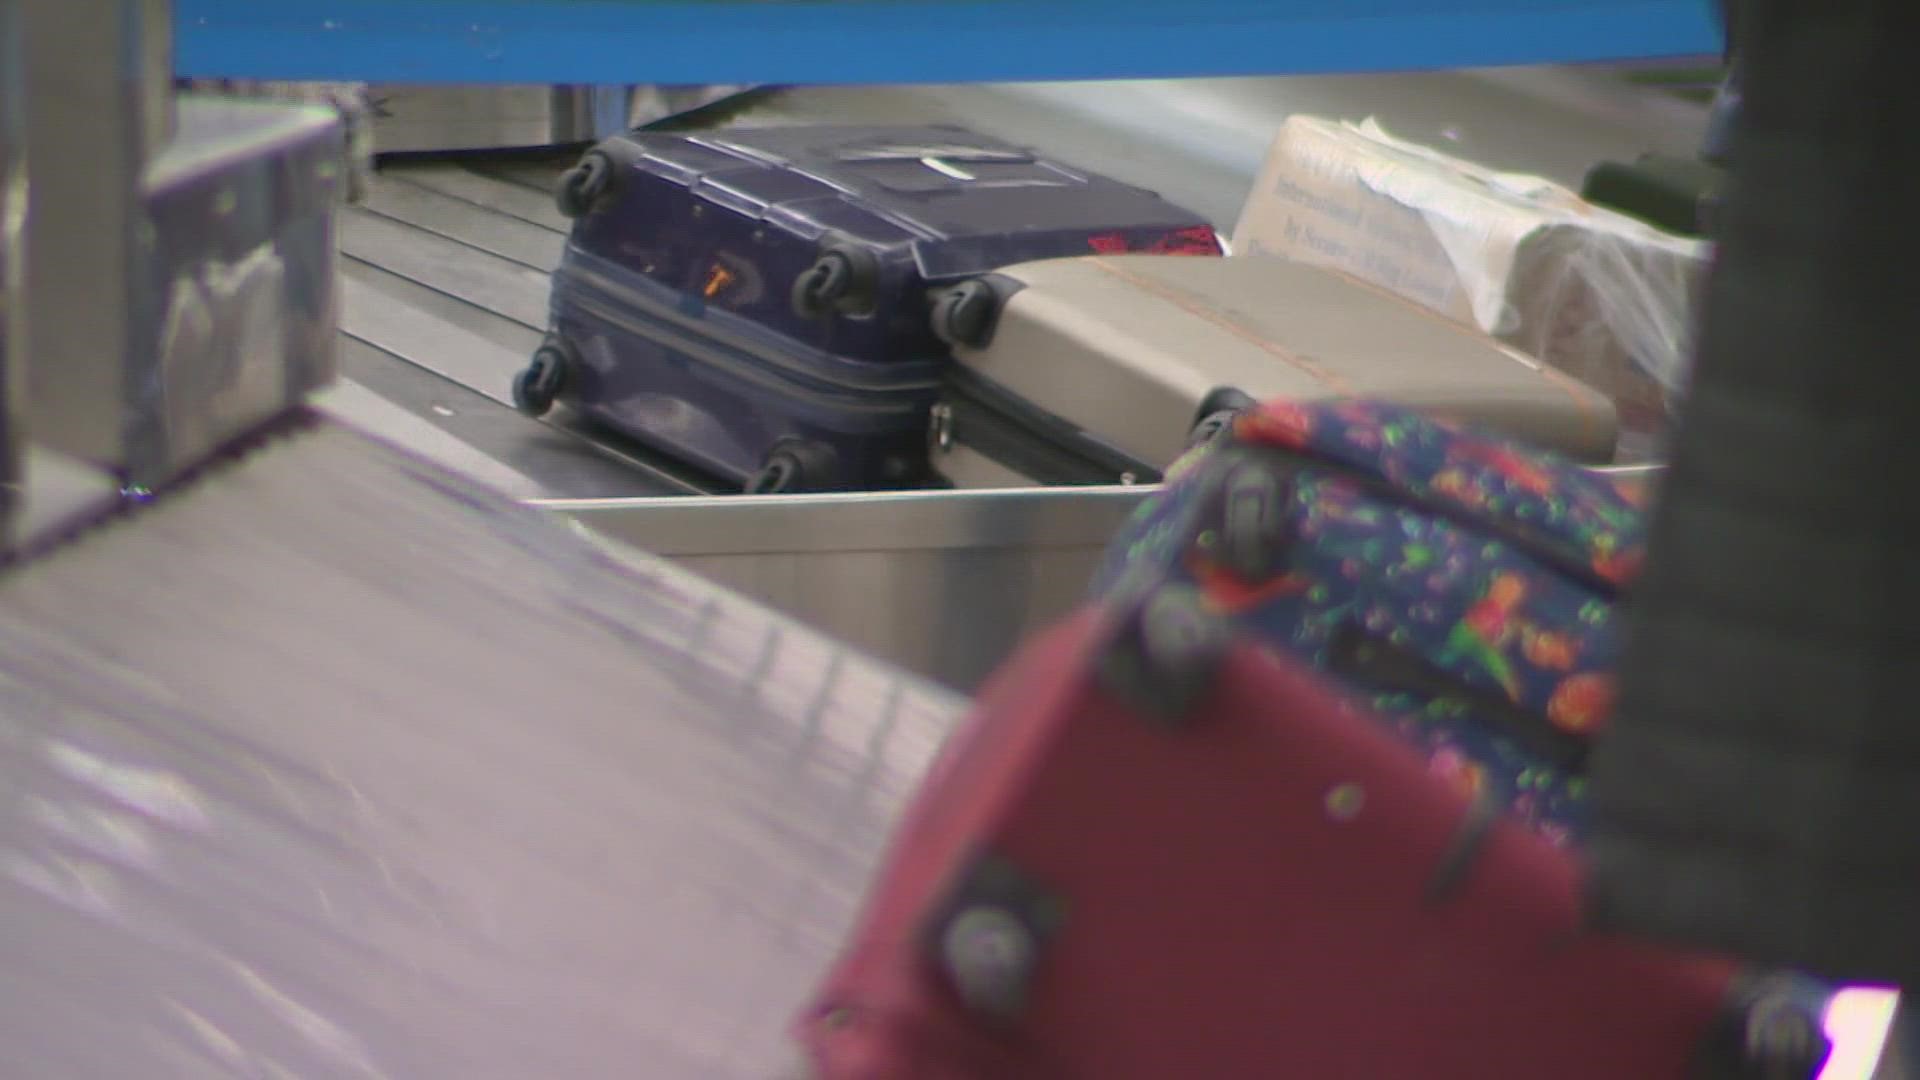 About 155,000 passengers are expected to travel through Sea-Tac International Airport for the Thanksgiving holiday.